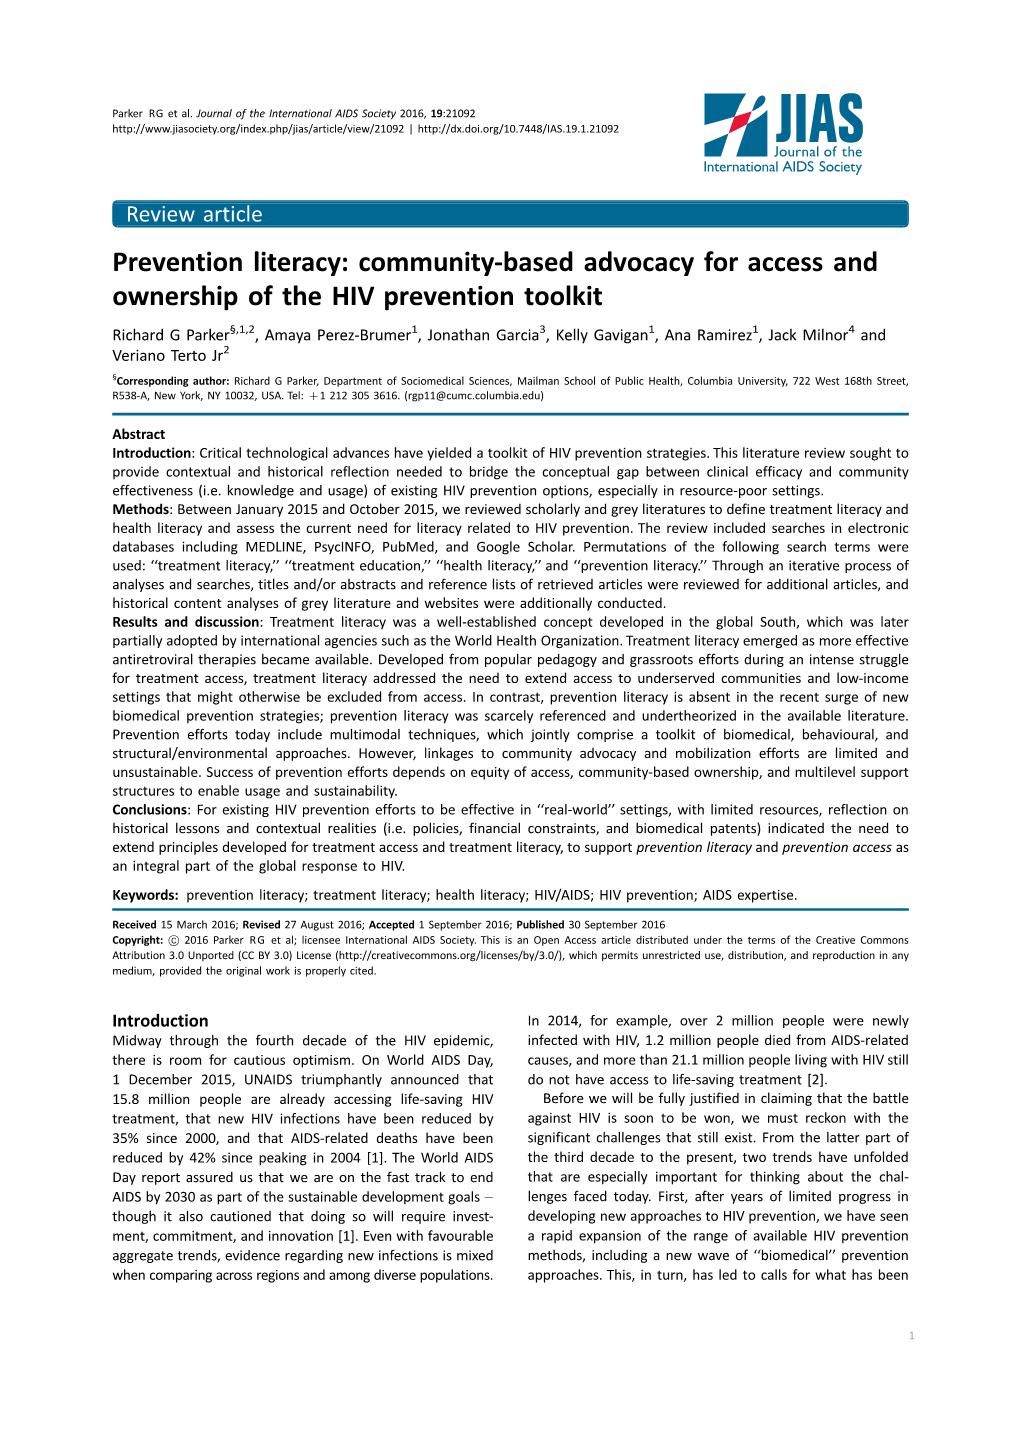 Prevention Literacy: Community-Based Advocacy for Access and Ownership